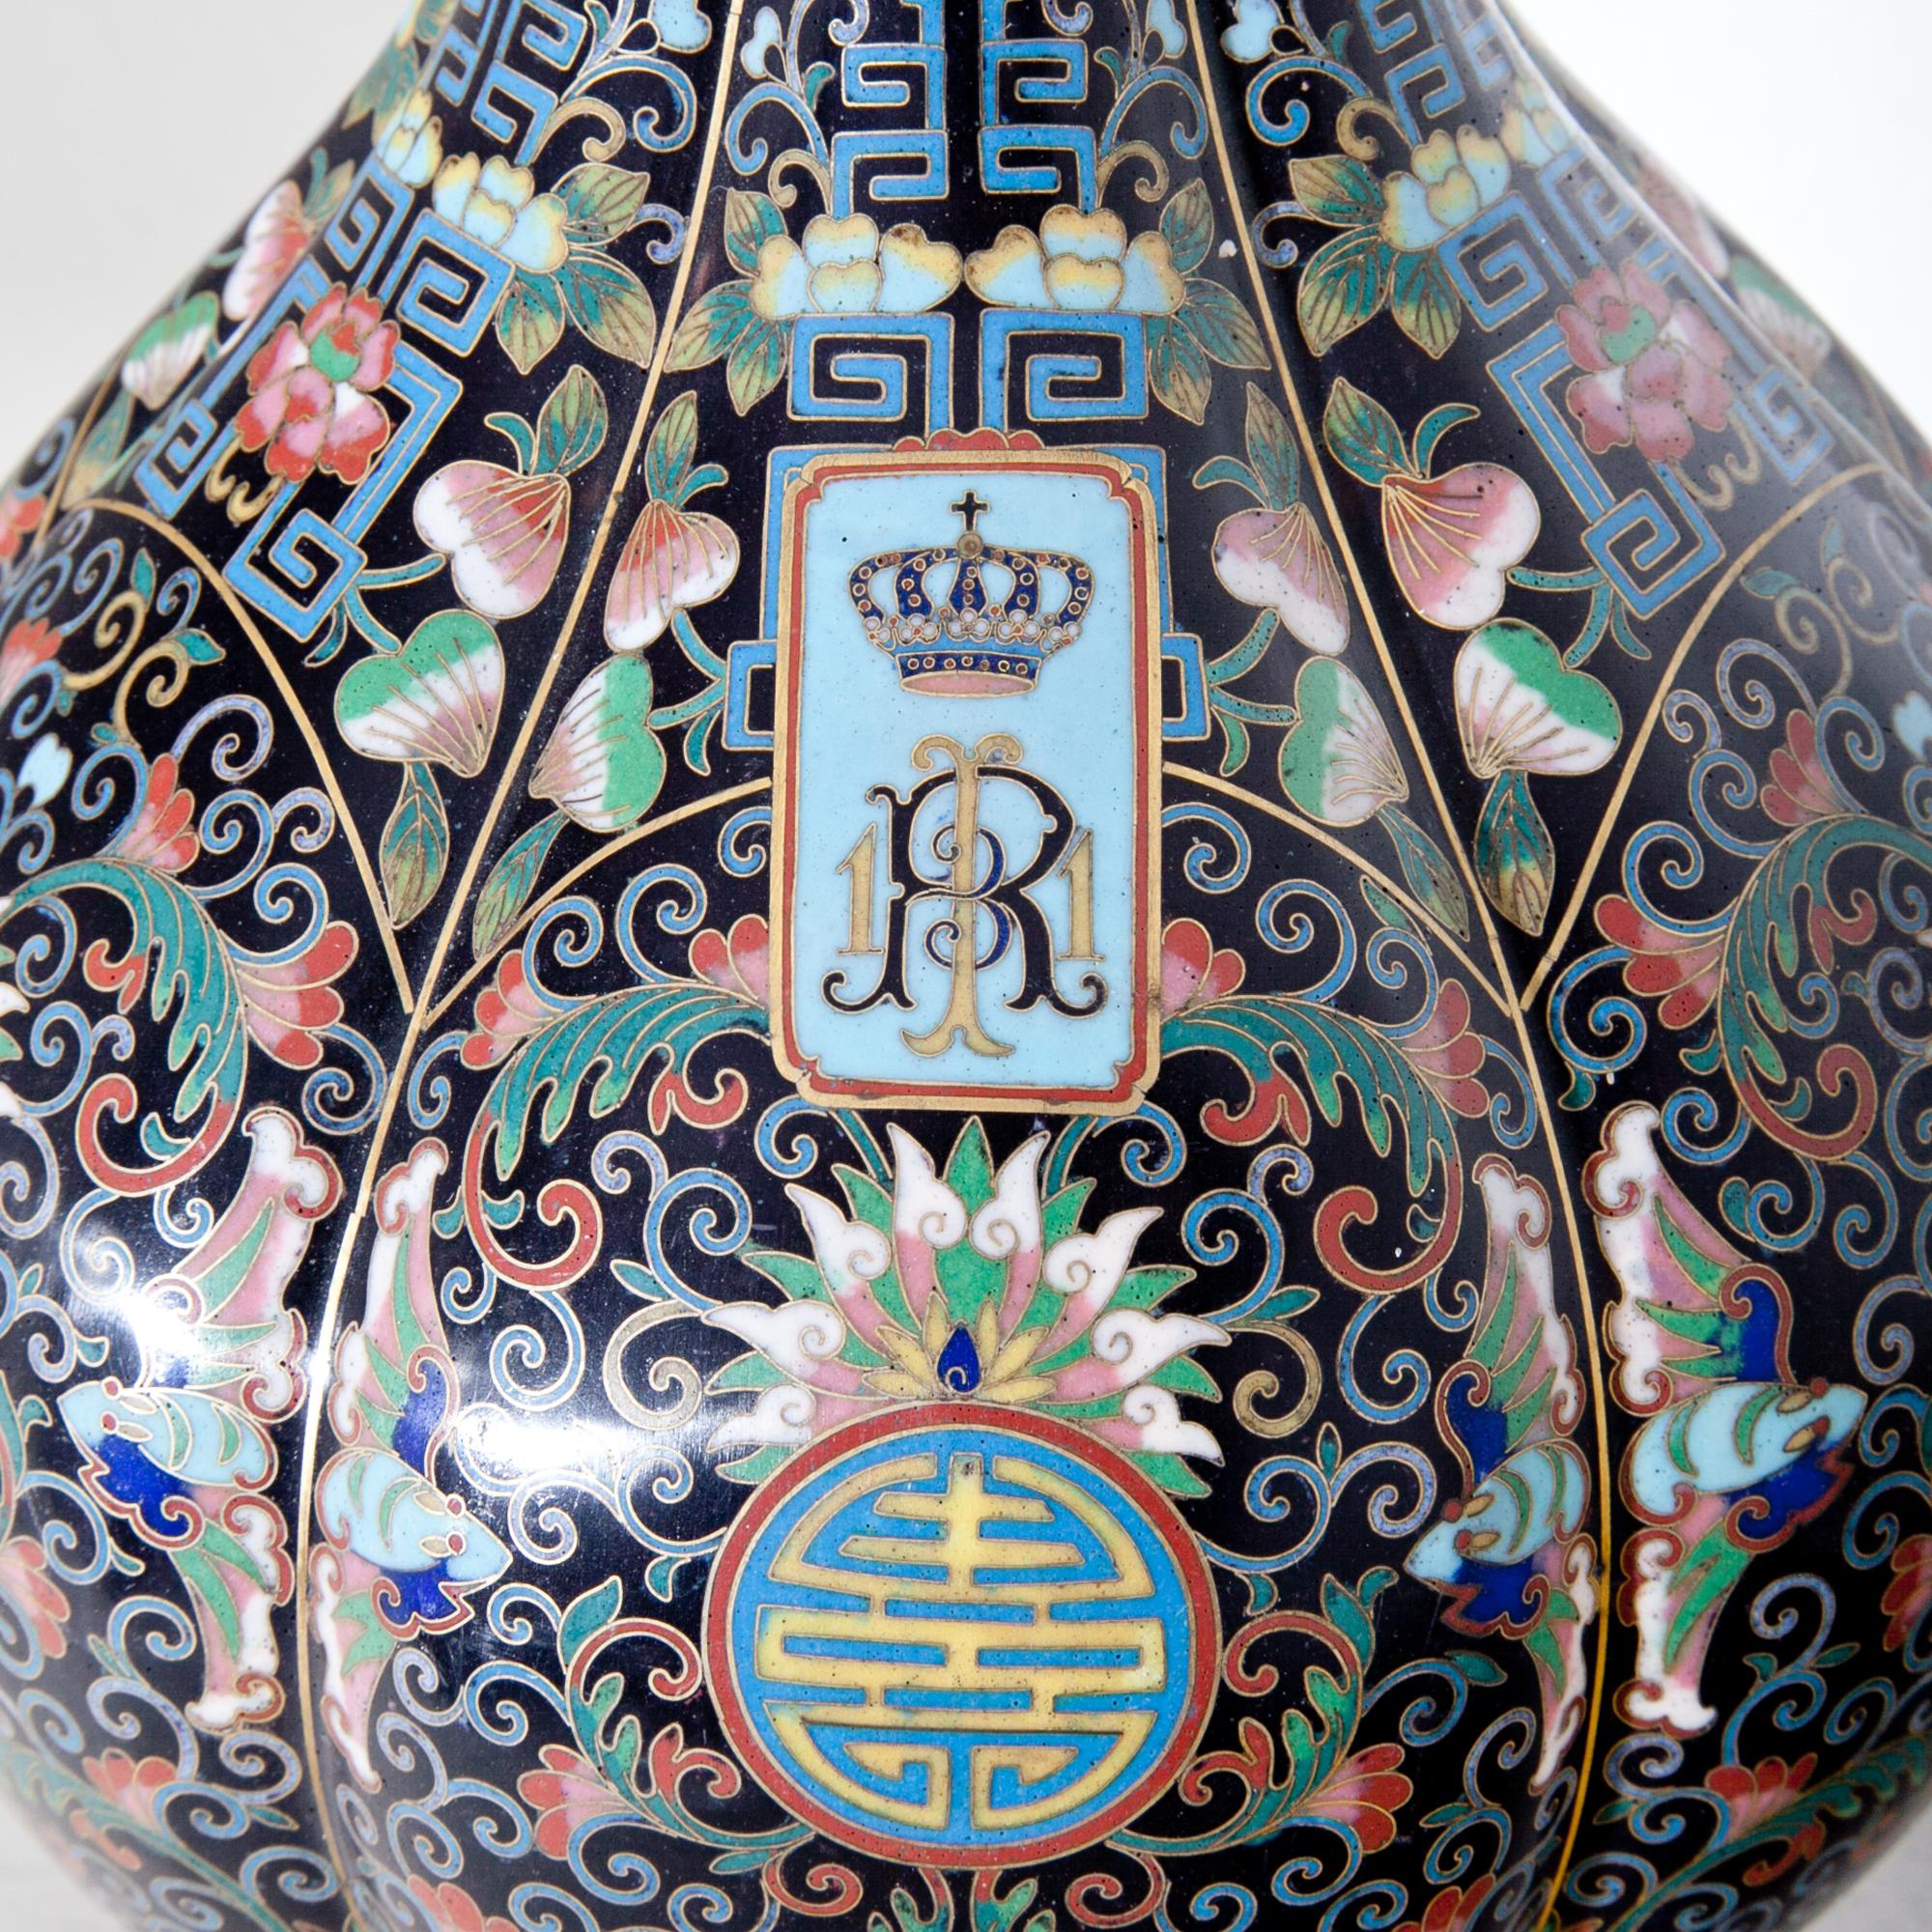 Cloisonné Vase for a European royal family in the shape of a gourd bottle, decorated with Asian ornaments and the royal cypher RI 11. Standing on a carved wooden Stand.